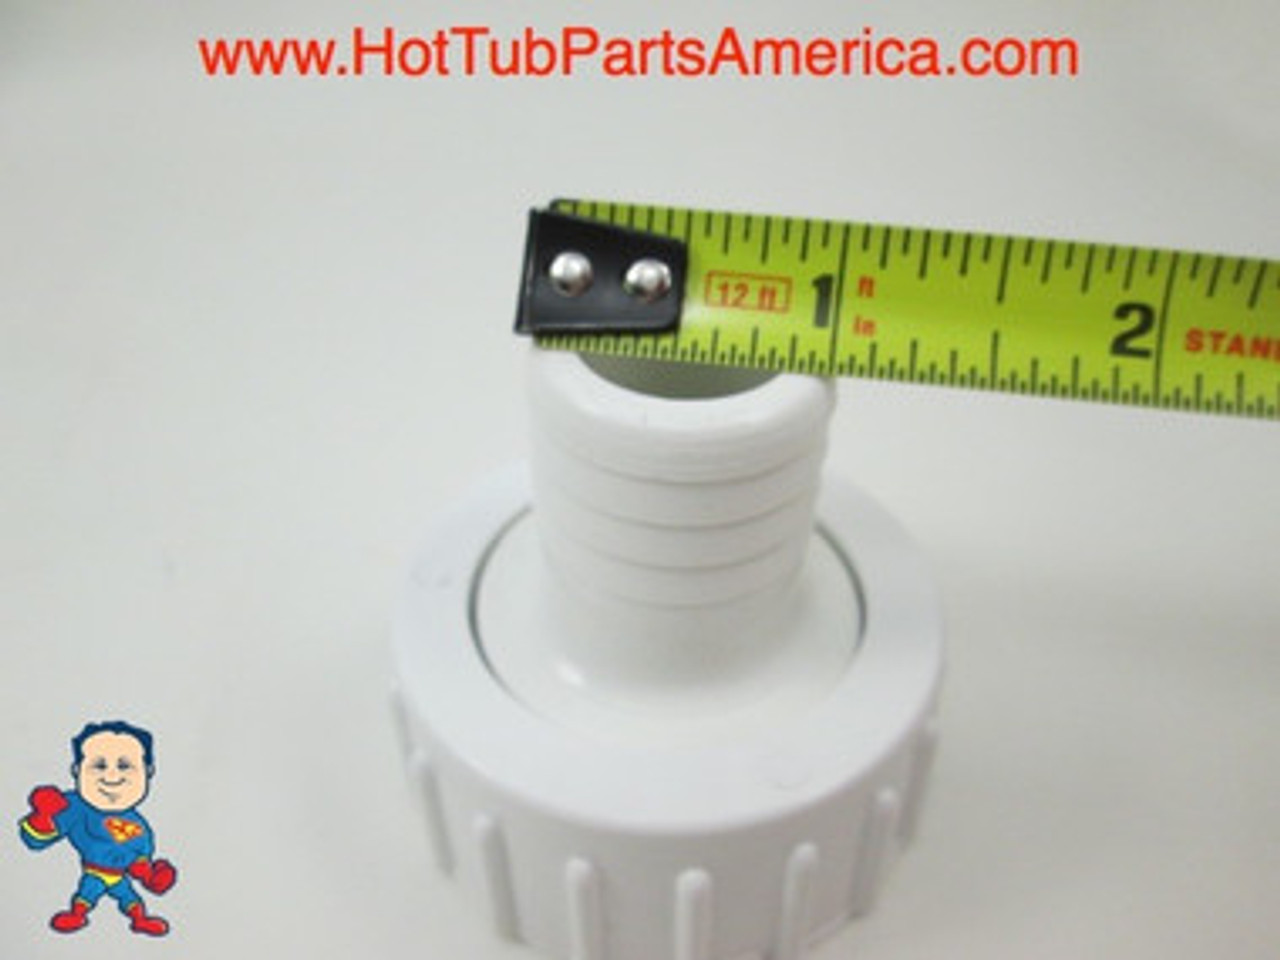 This Barb measures 1" Outside Diameter and accepts a hose that measures 1" I.D. and 1 1/4" O.D. 
1" X 1" Barb Pump Union O-Ring Use with Tiny Might and other Pumps